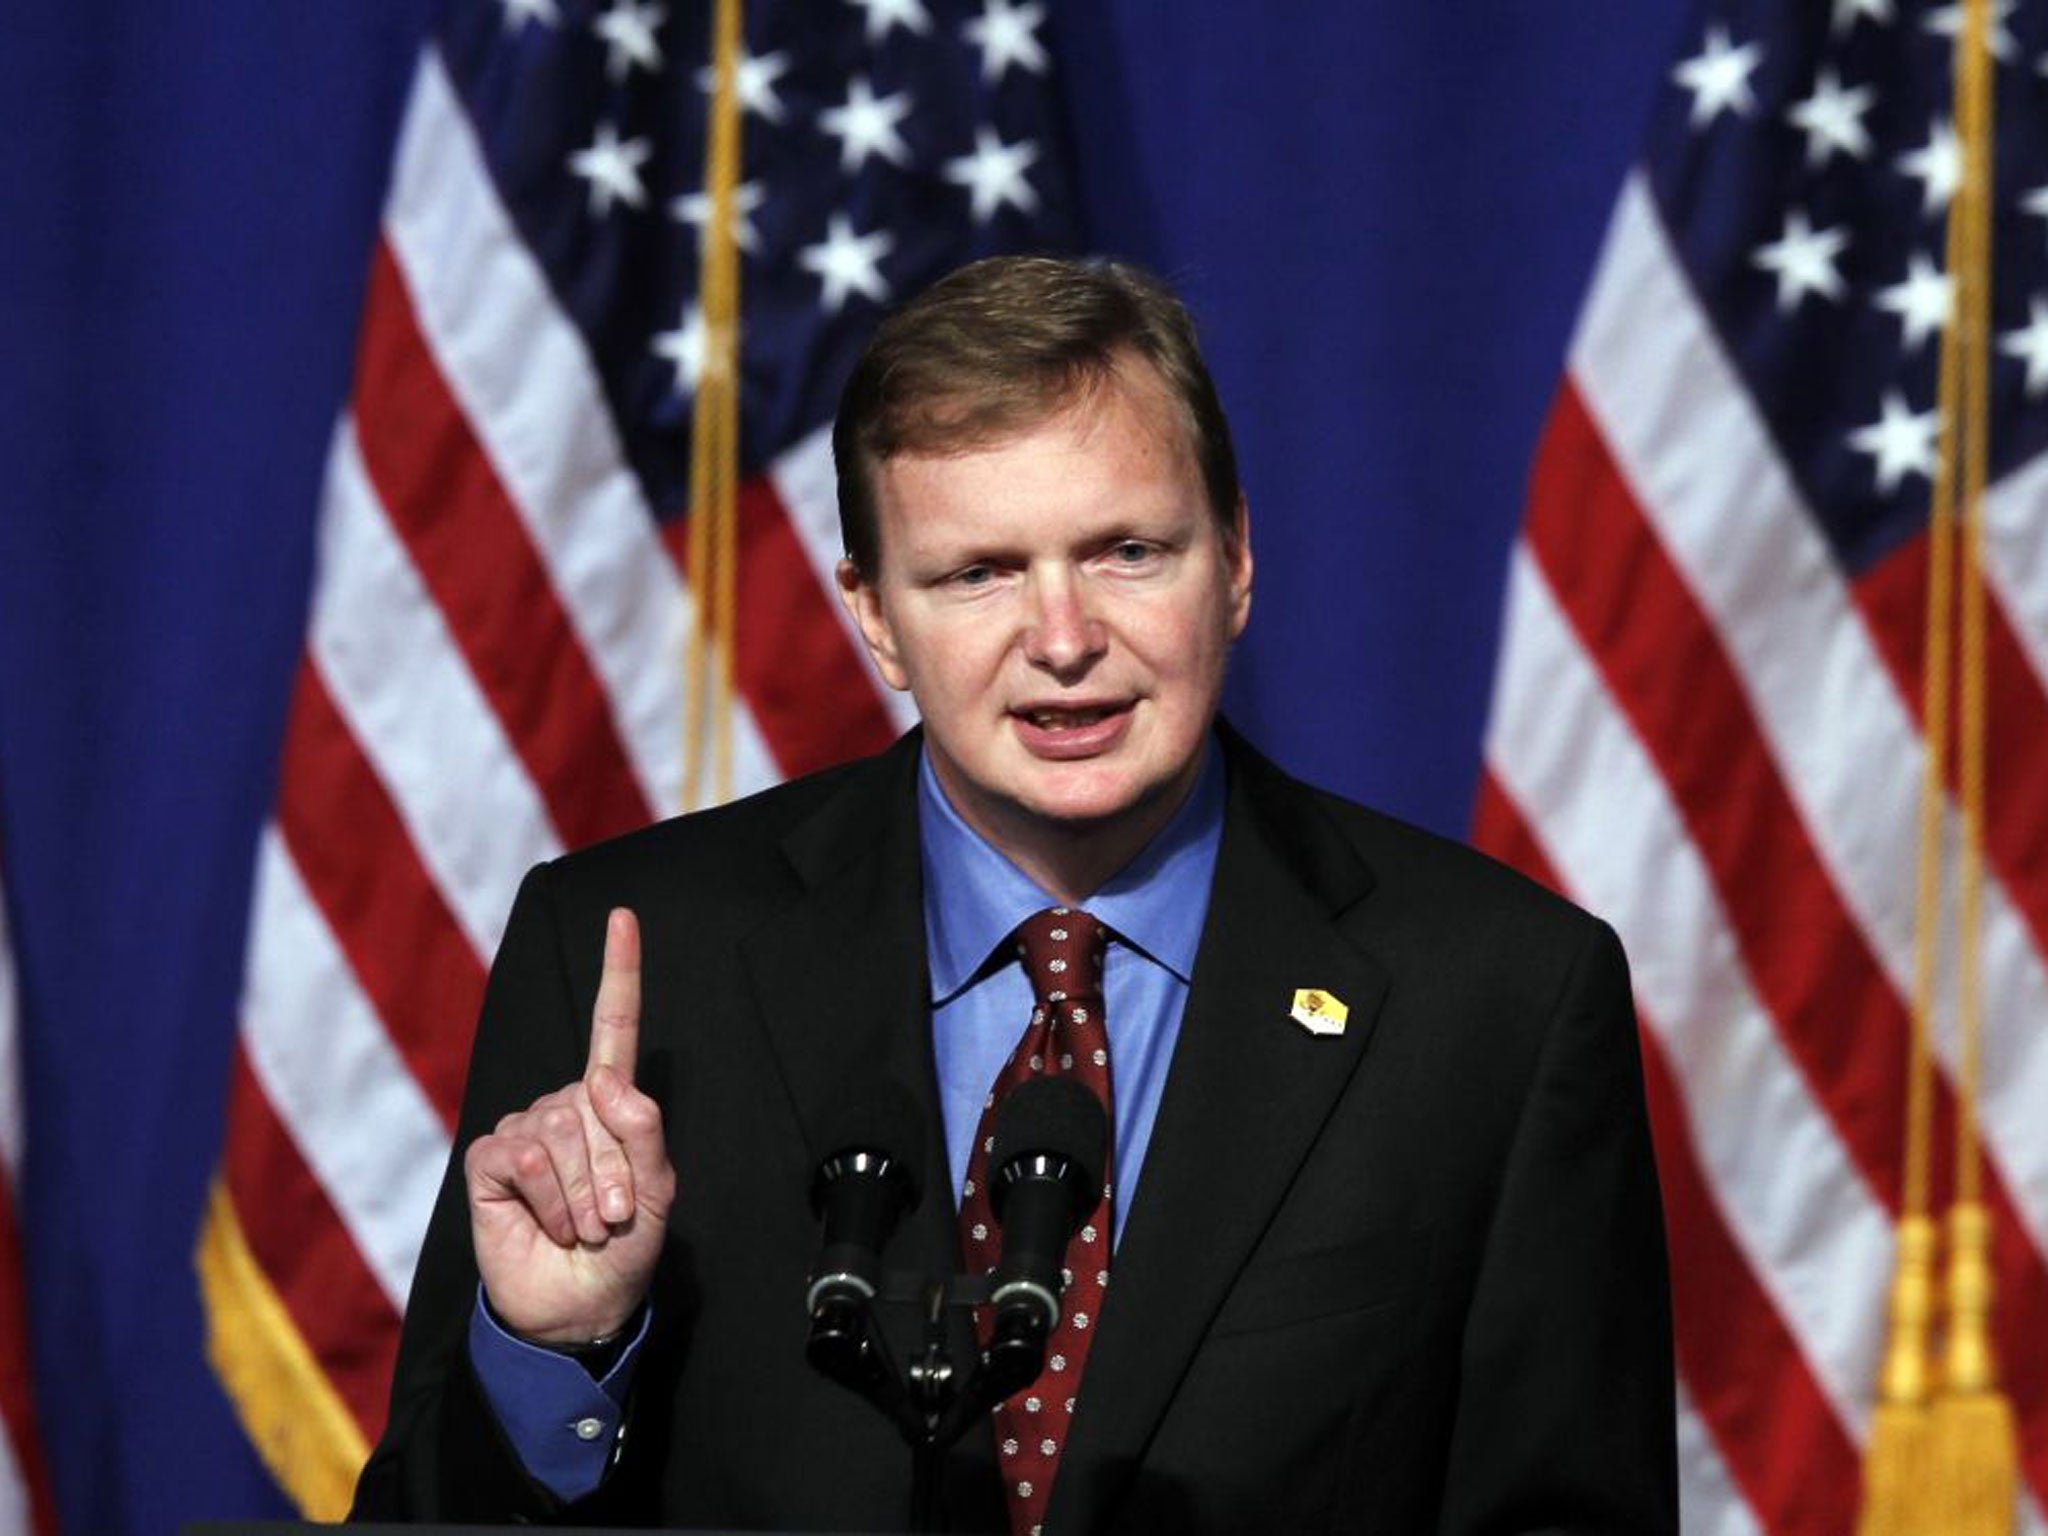 Jim Messina masterminded Barack Obama’s successful campaign to retain office